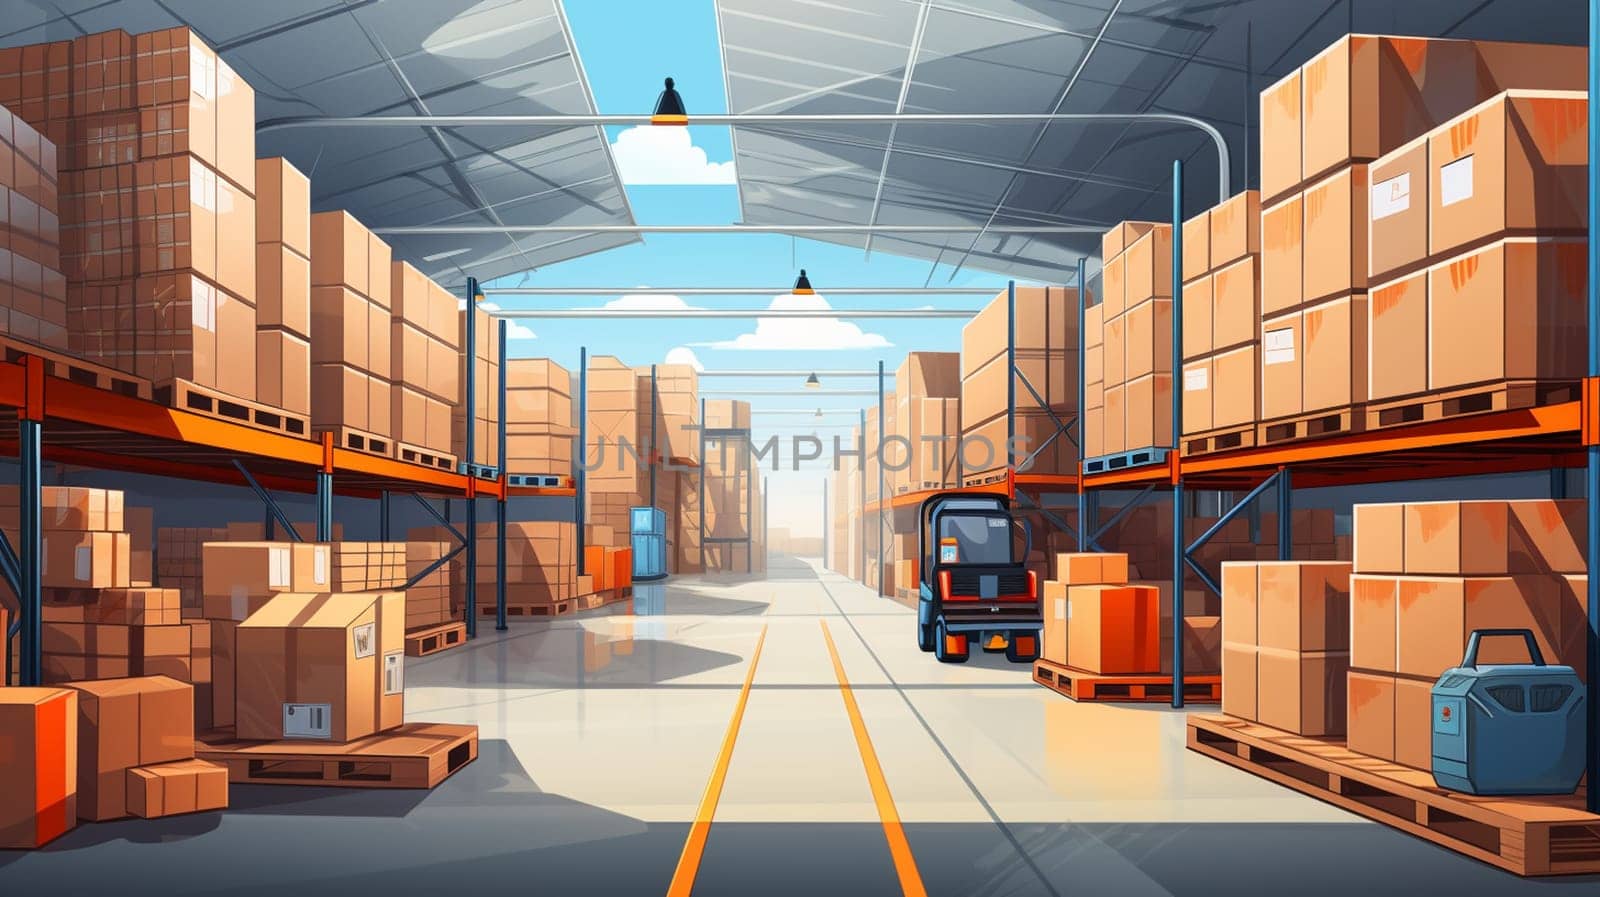 Forklift preparing products for shipment. Warehouse distribution concept. 3d rendering by Andelov13